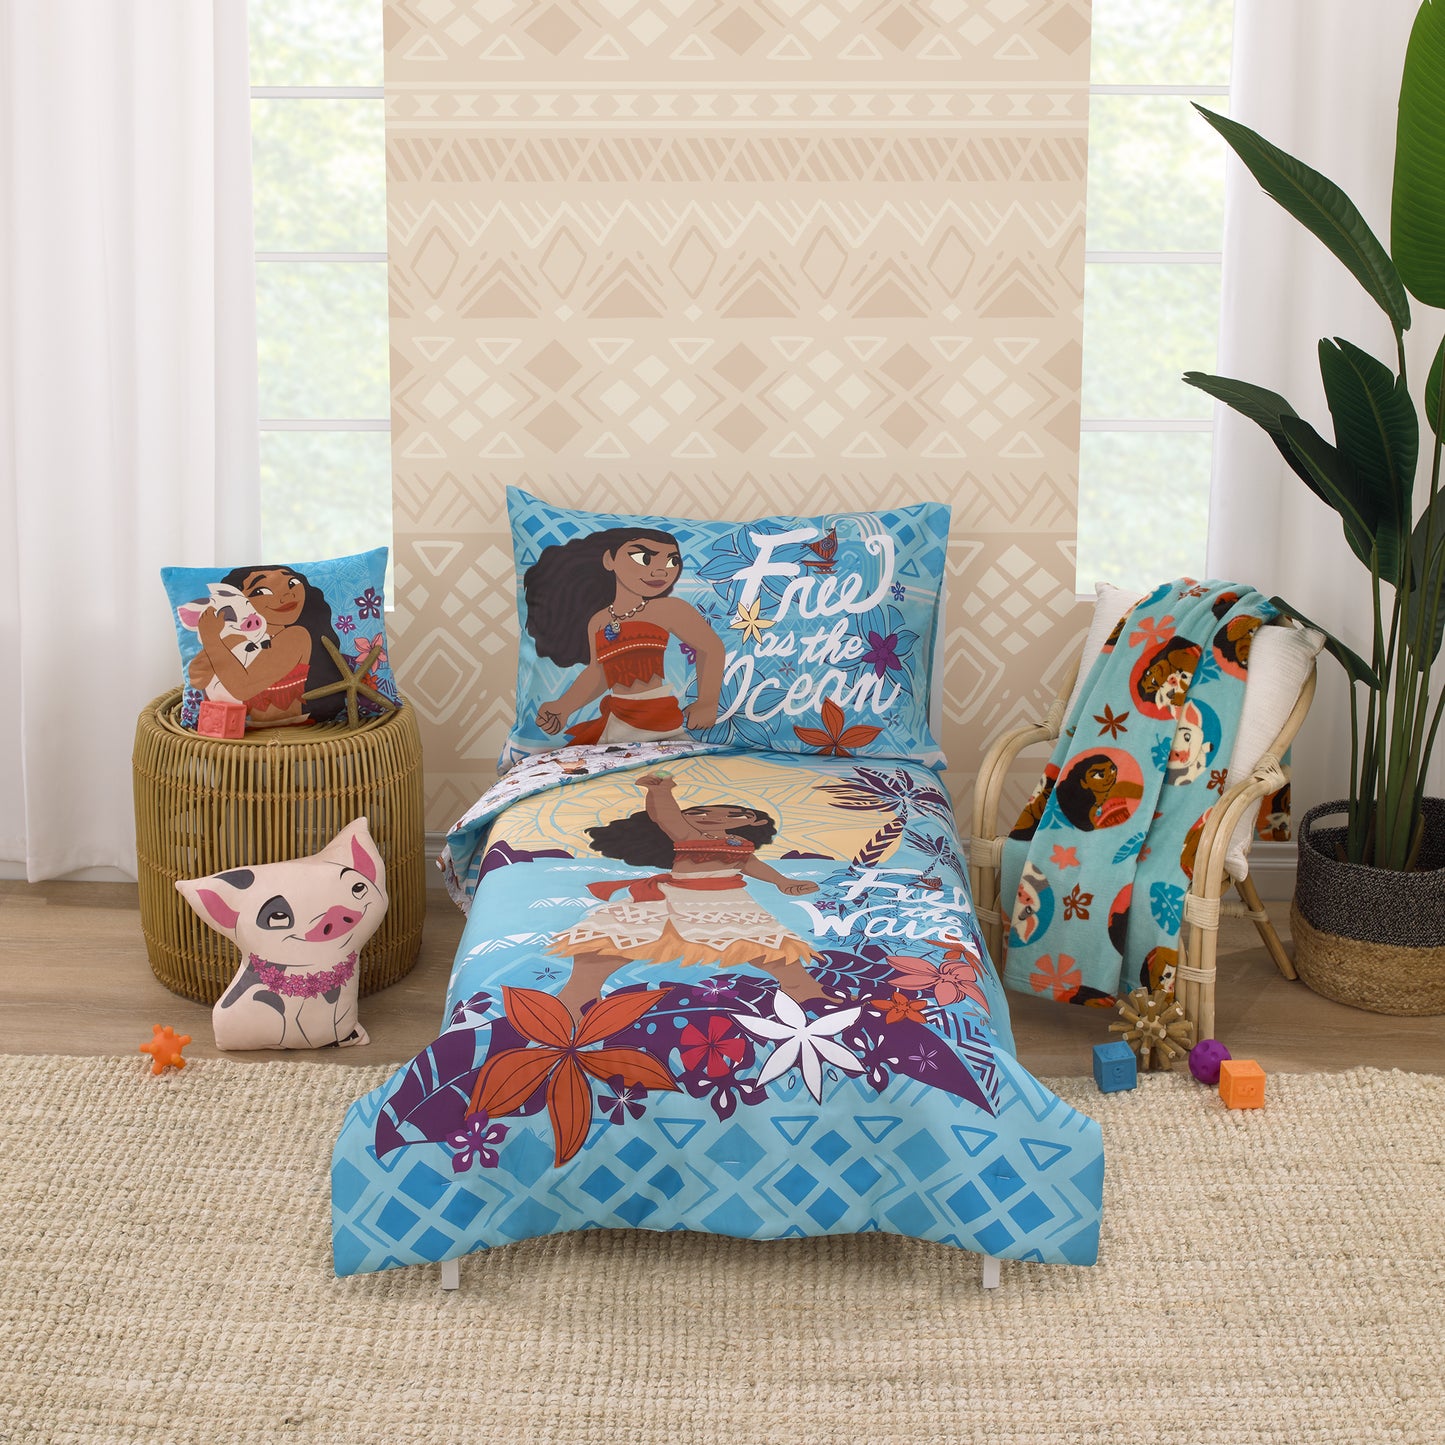 Disney Moana Free as the Ocean Aqua, Purple, Orange and White Tropical 4 Piece Toddler Bed Set - Comforter, Fitted Bottom Sheet, Flat Top Sheet, and Reversible Pillowcase